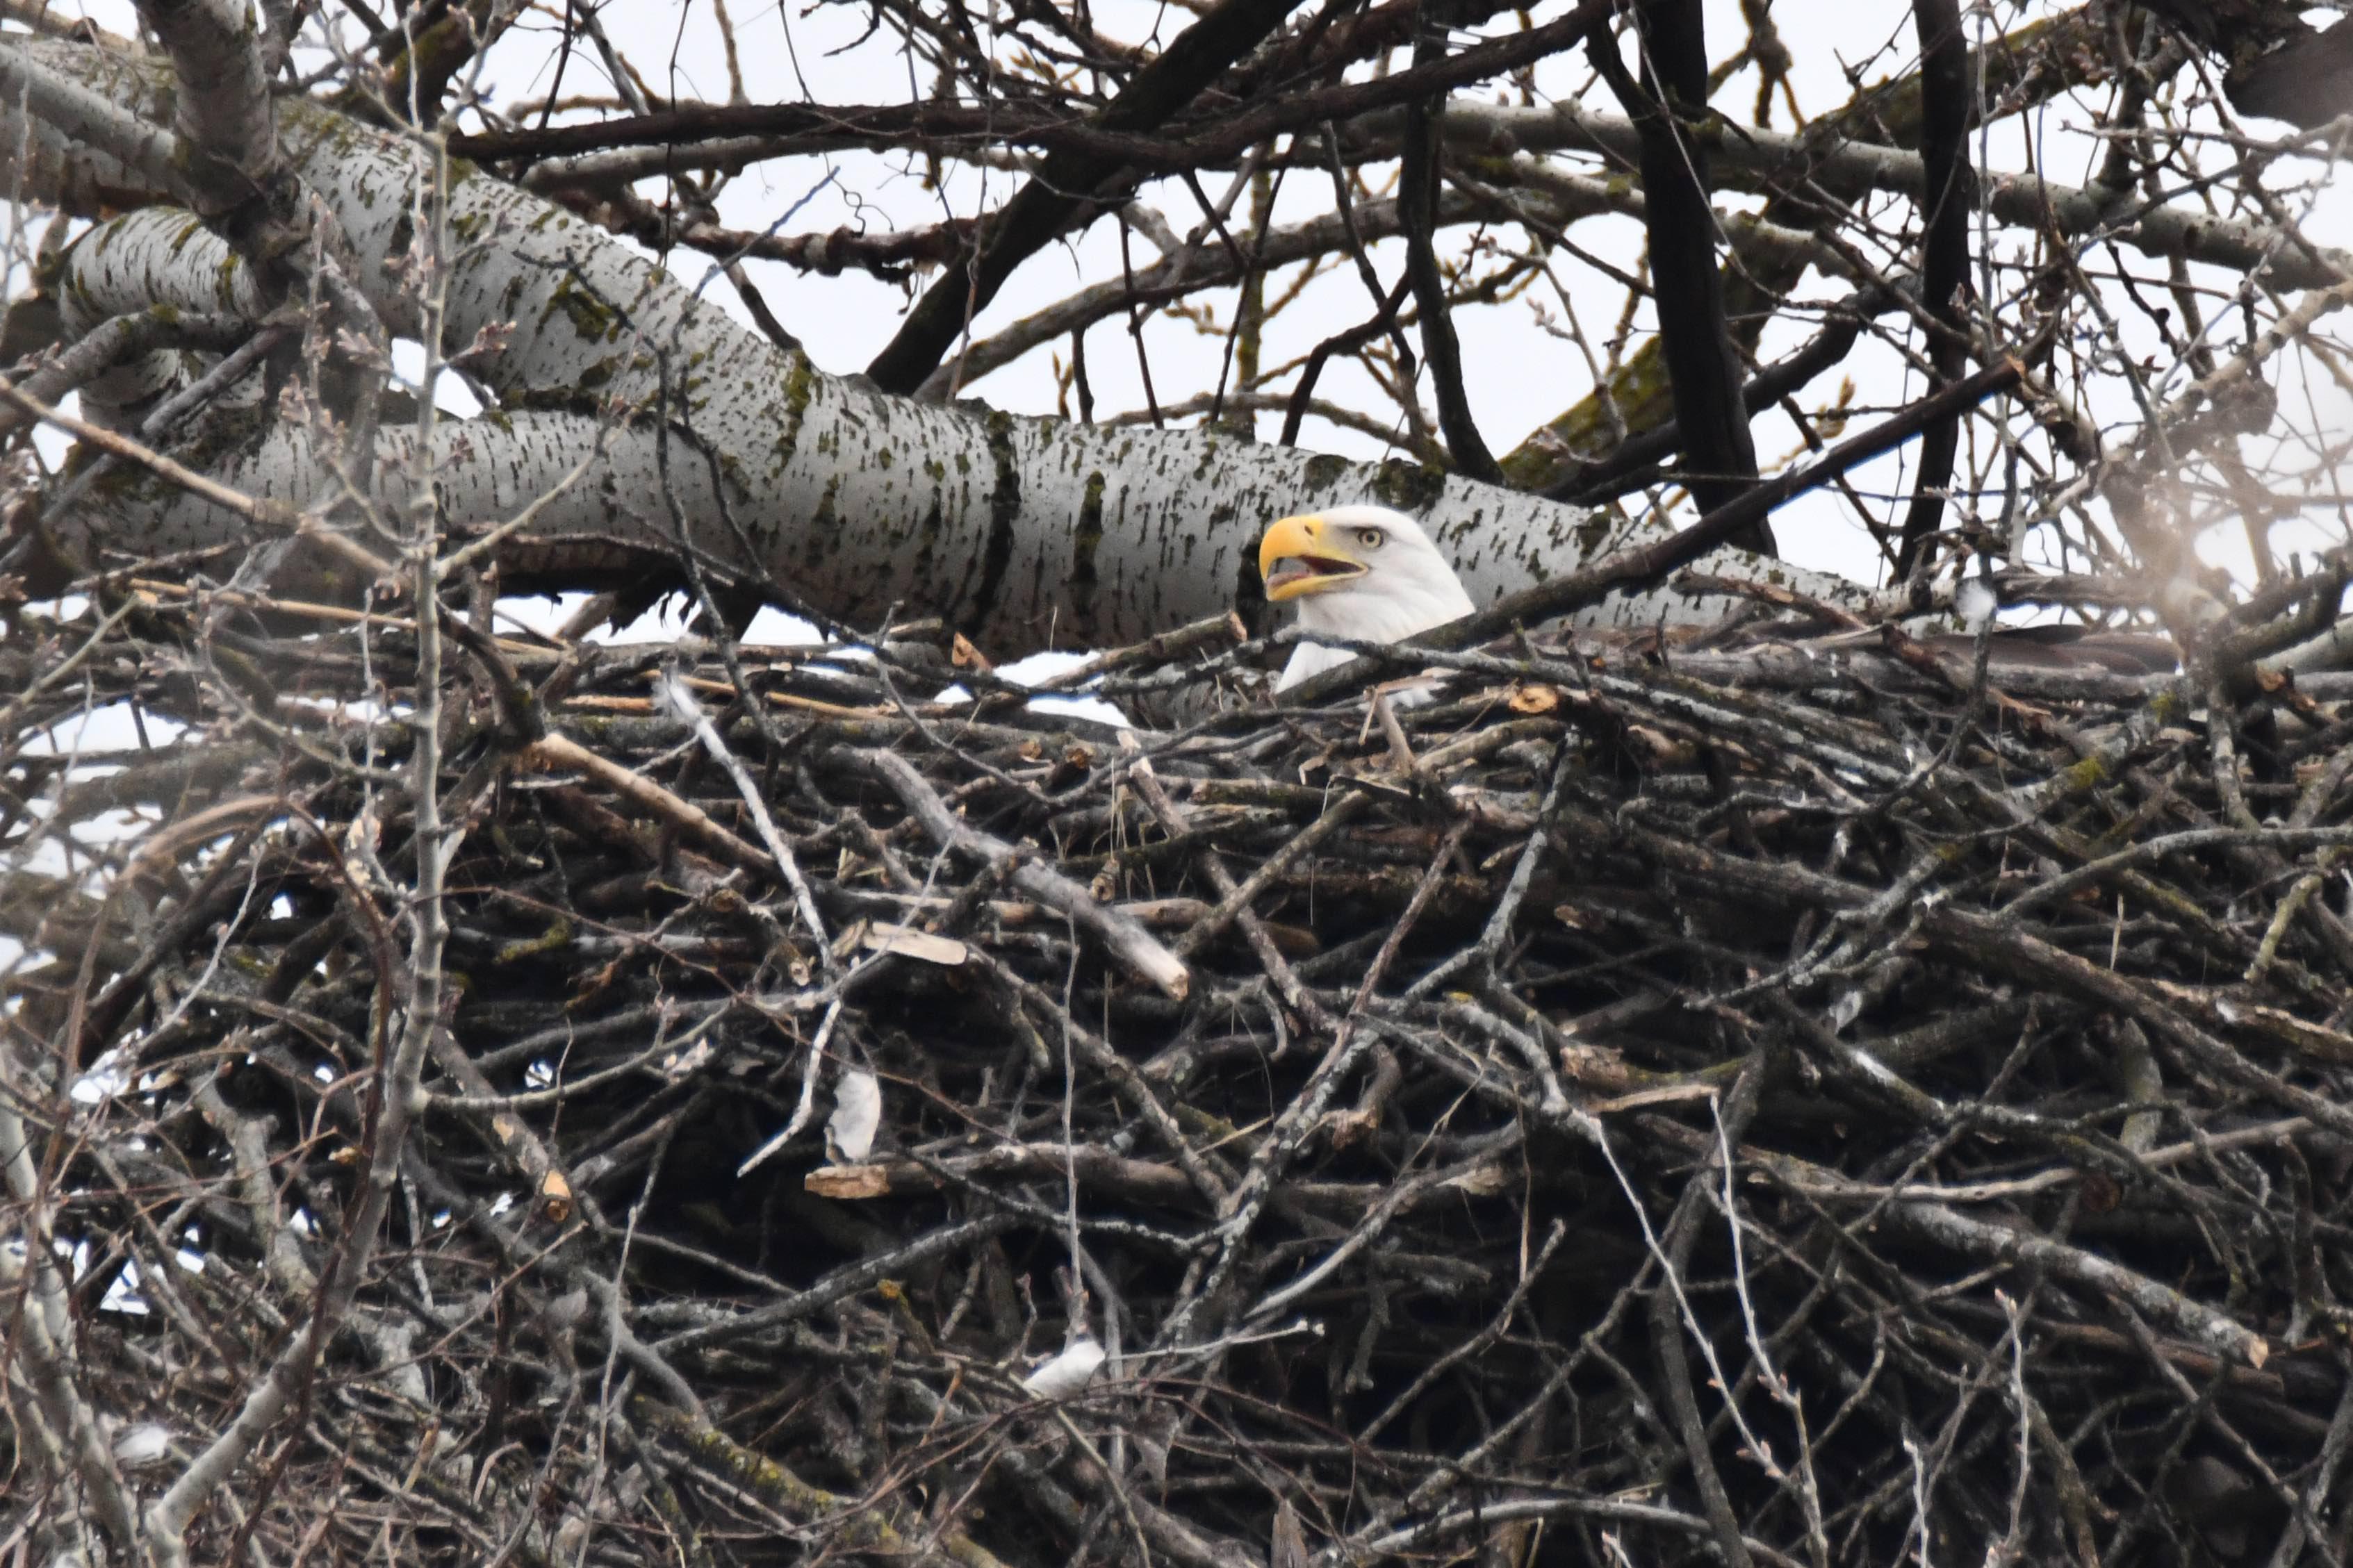 Four active eagle nests being monitored this winter in the Forest Preserve District of Will County. (Forest Preserve District of Will County / Chad Merda)